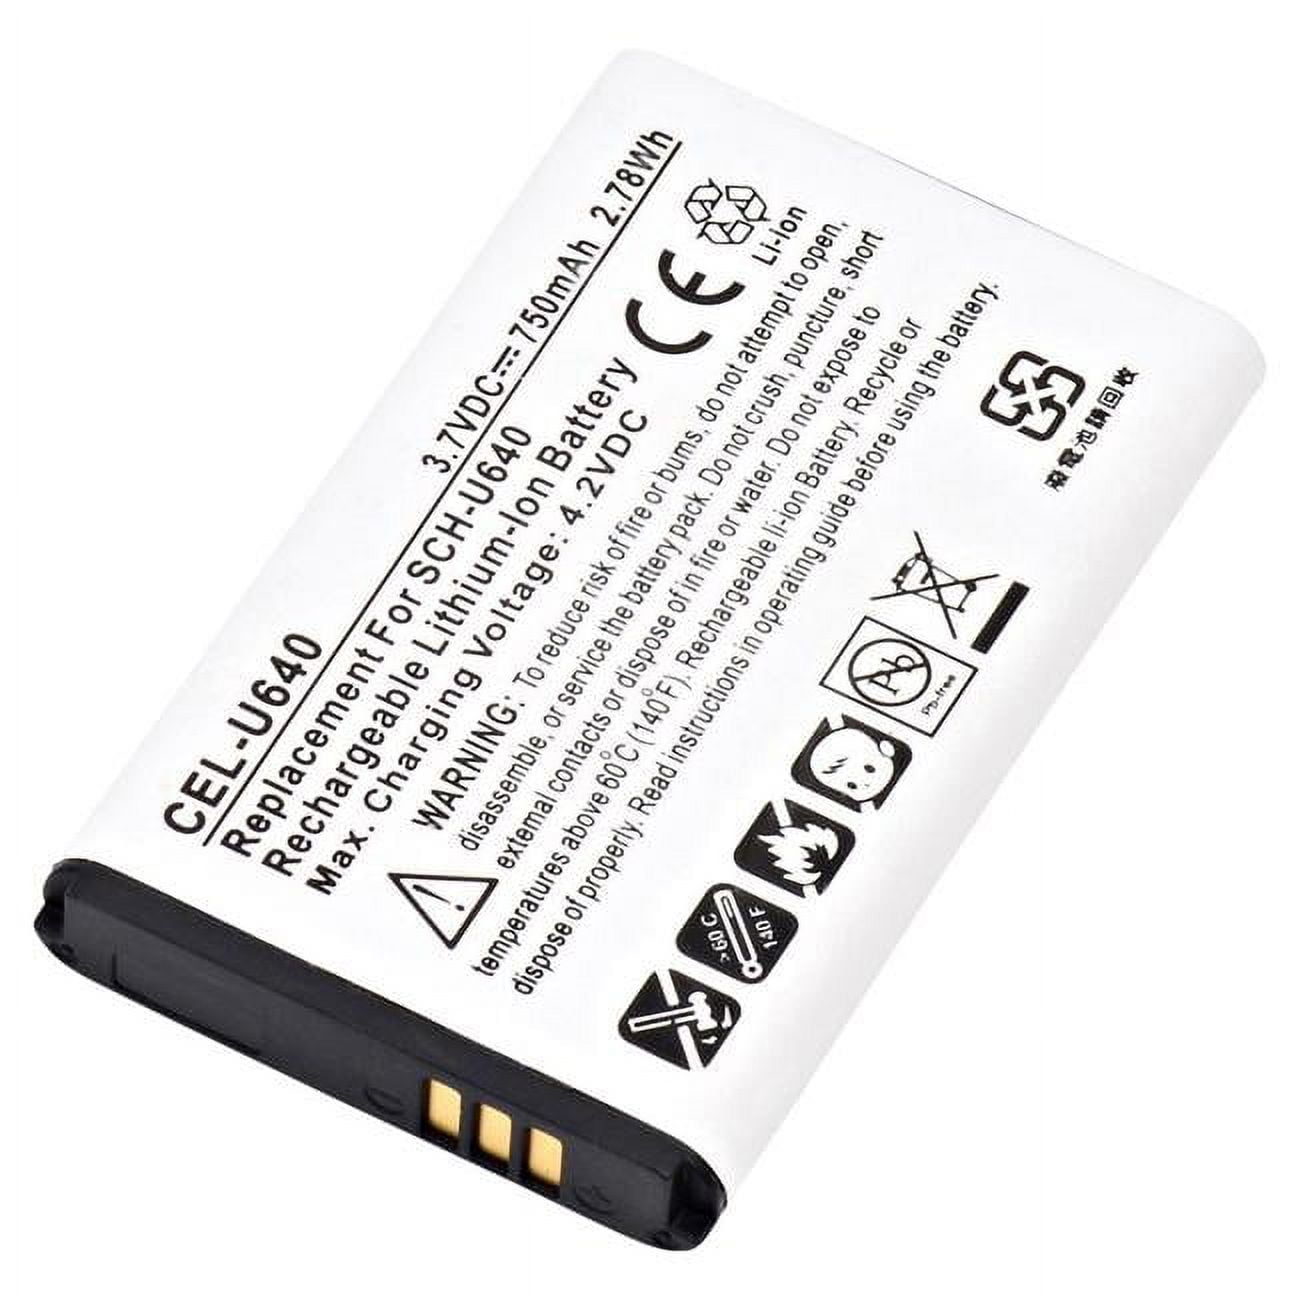 Picture of Ultralast CEL-U640 3.7V & 750 mAh Replacement Lithium-Ion Battery for Samsung Convoy Cellular Phone